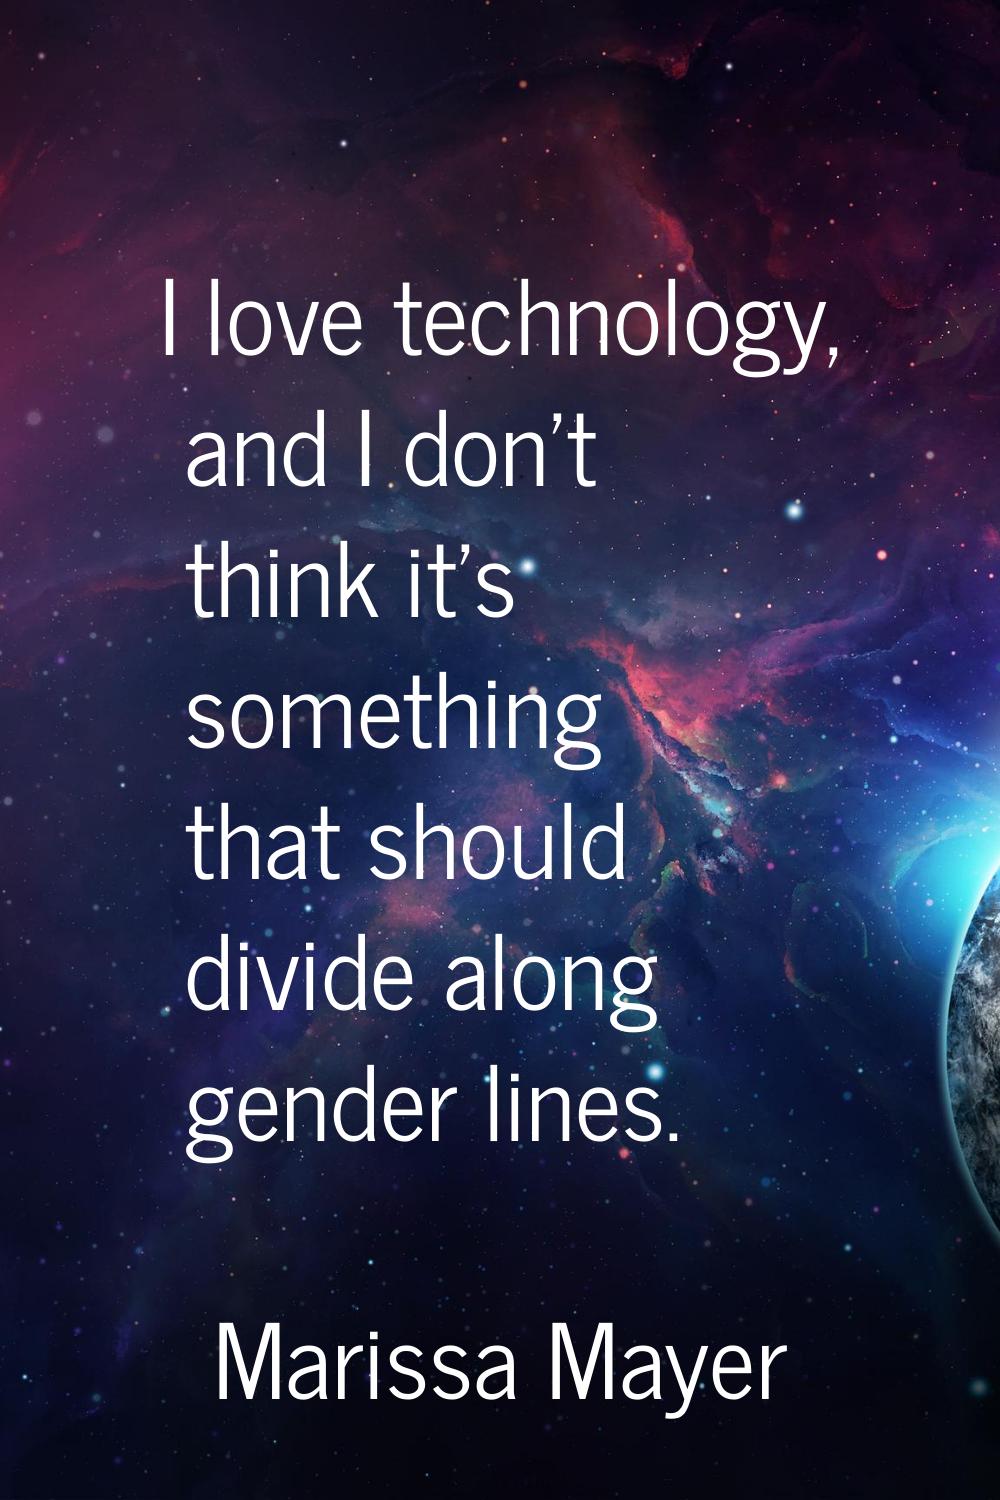 I love technology, and I don't think it's something that should divide along gender lines.